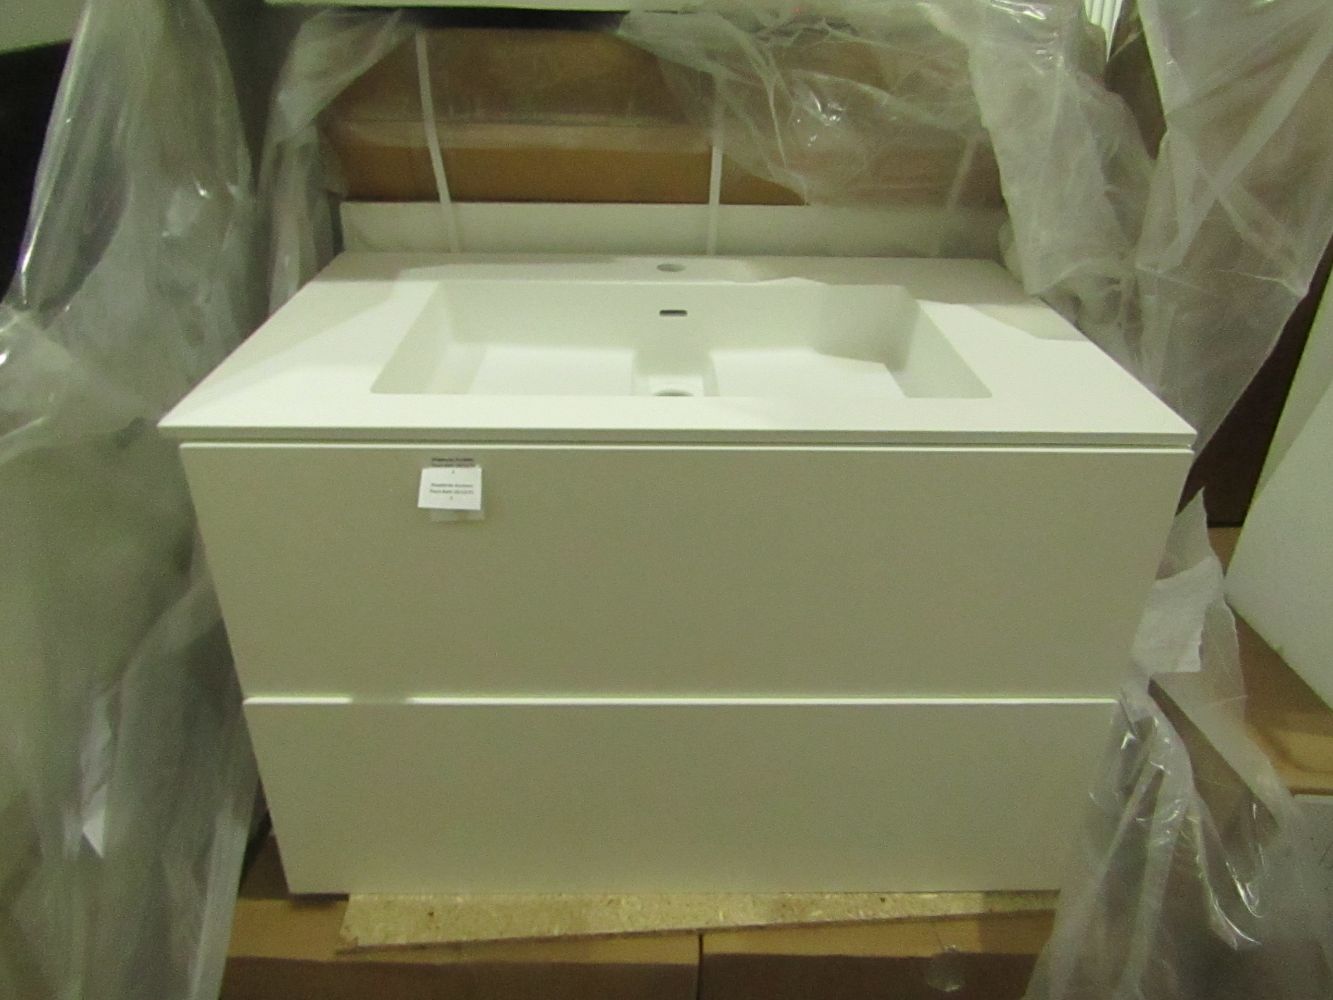 Rare chance to Buy COSMIC bathroom units with basins at Auction Prices as well as radiators, mirrored cabinets and much more!